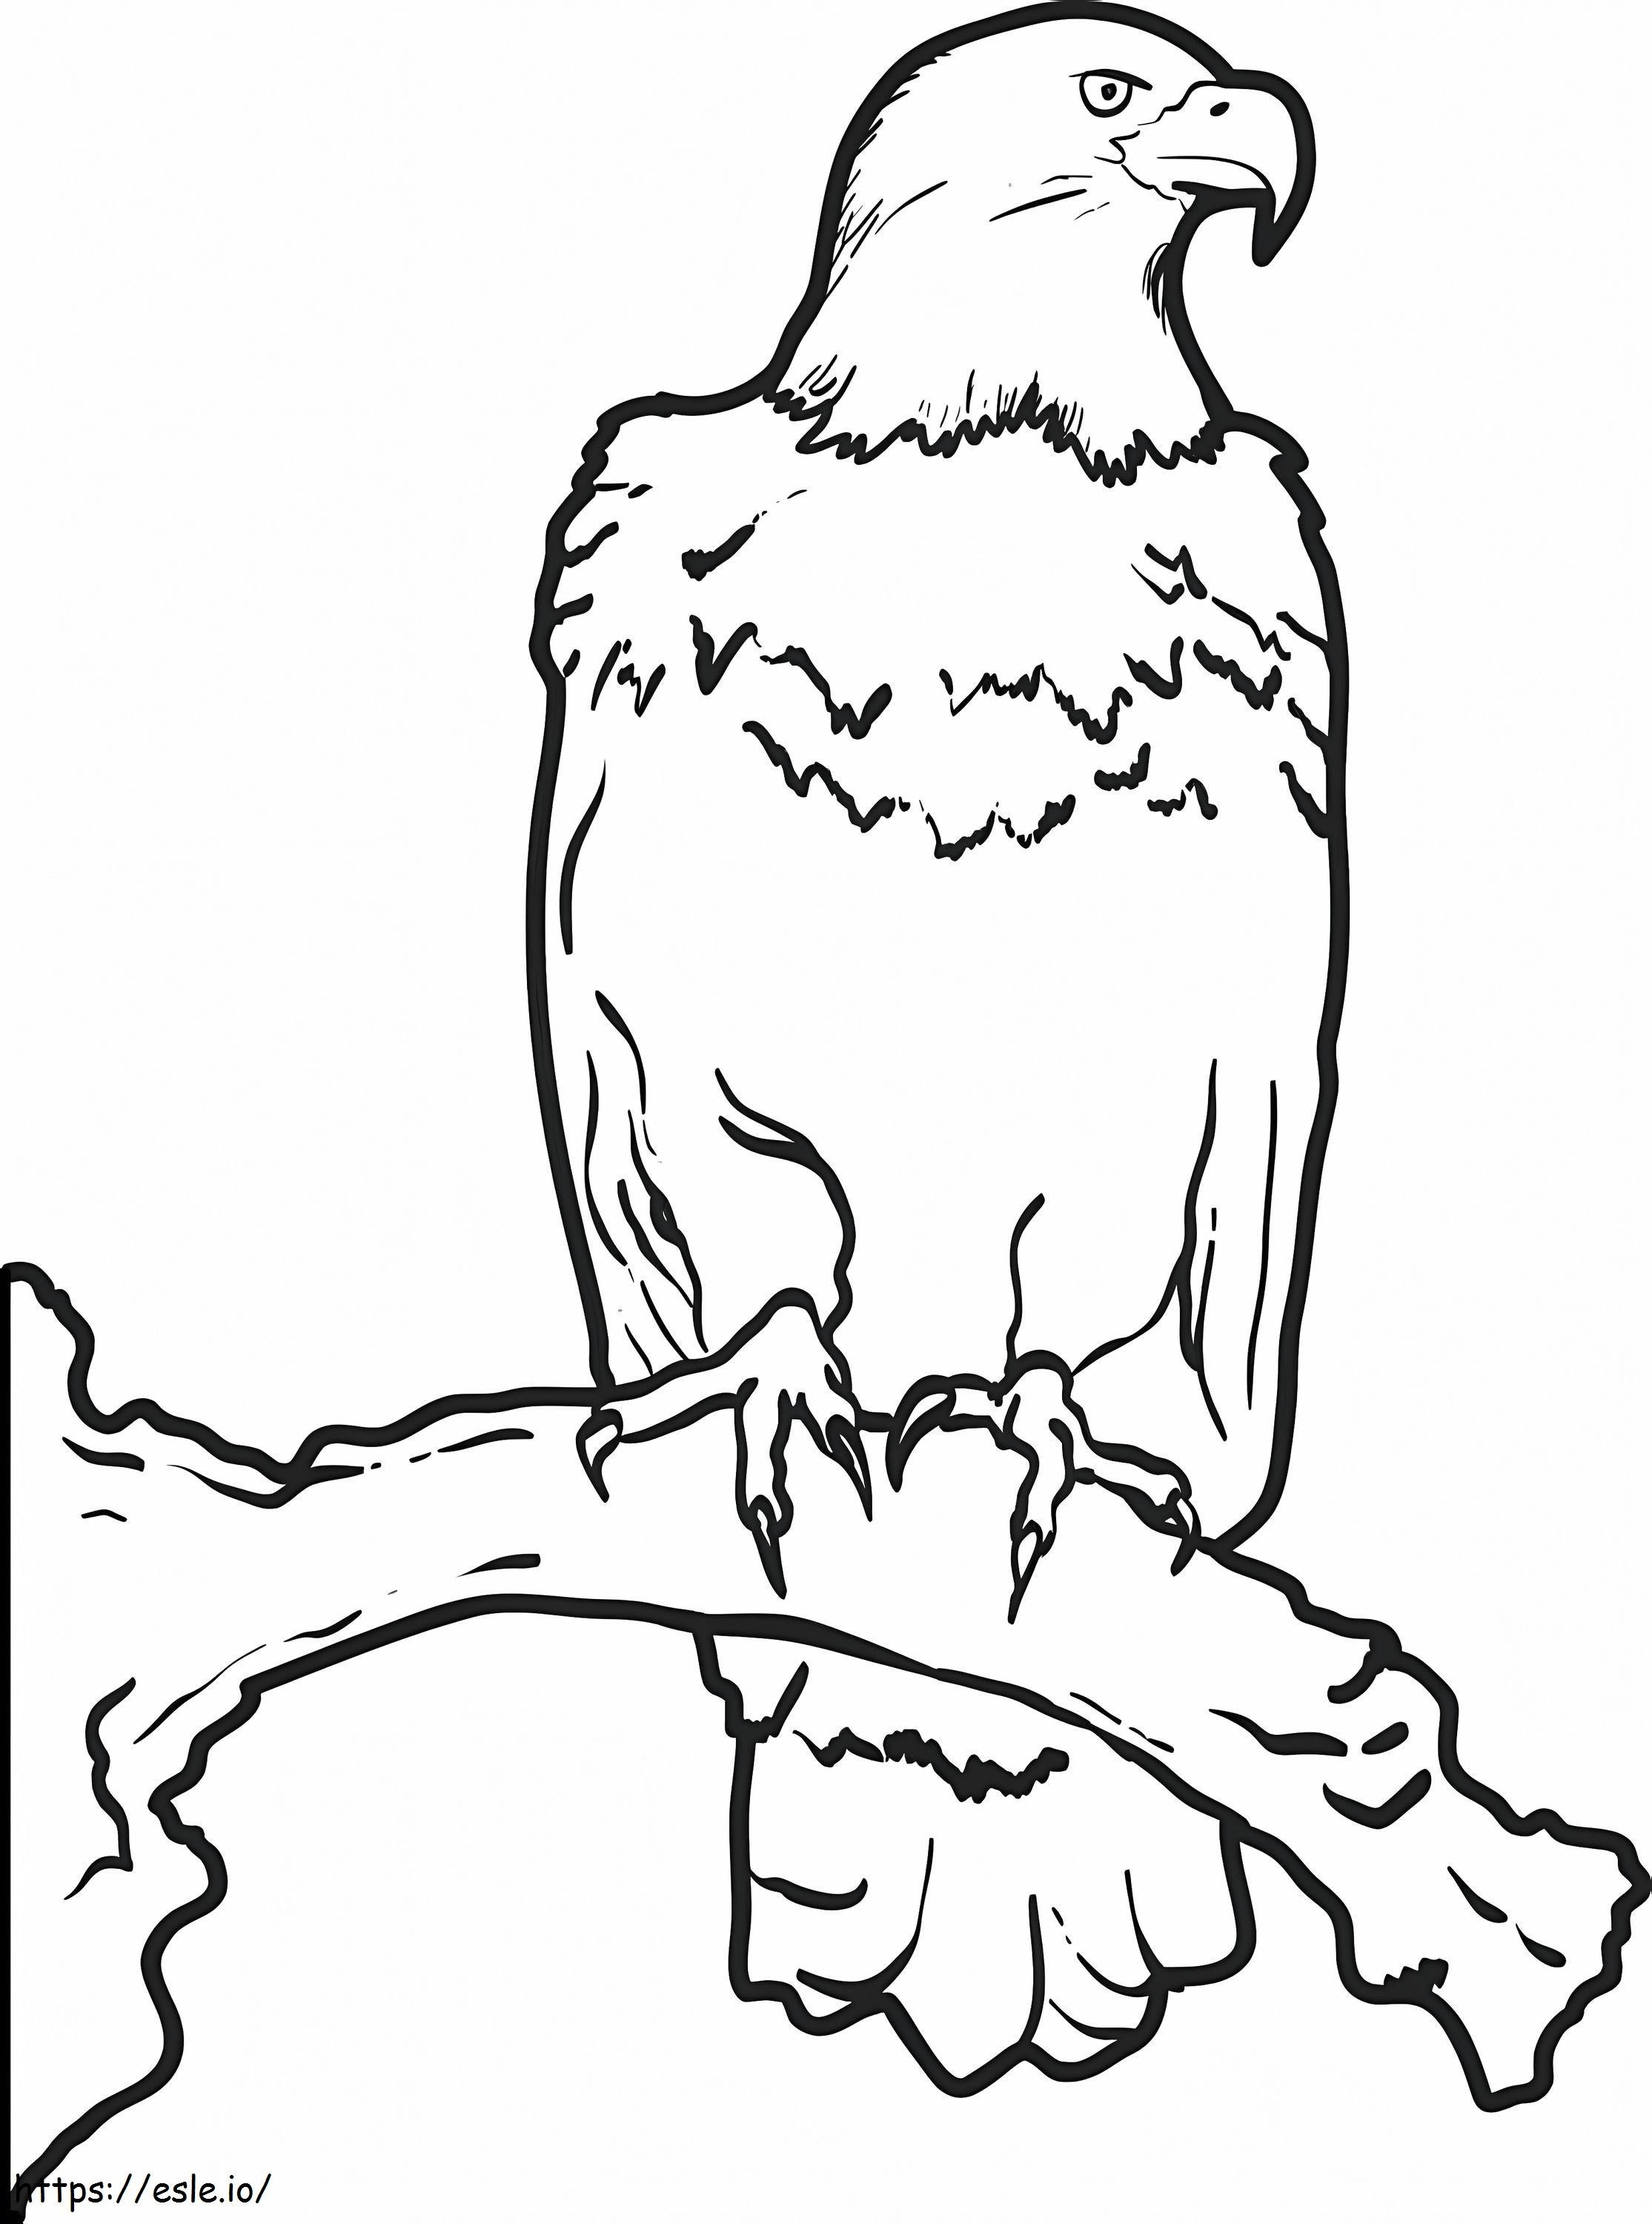 Bald Eagle On A Branch coloring page